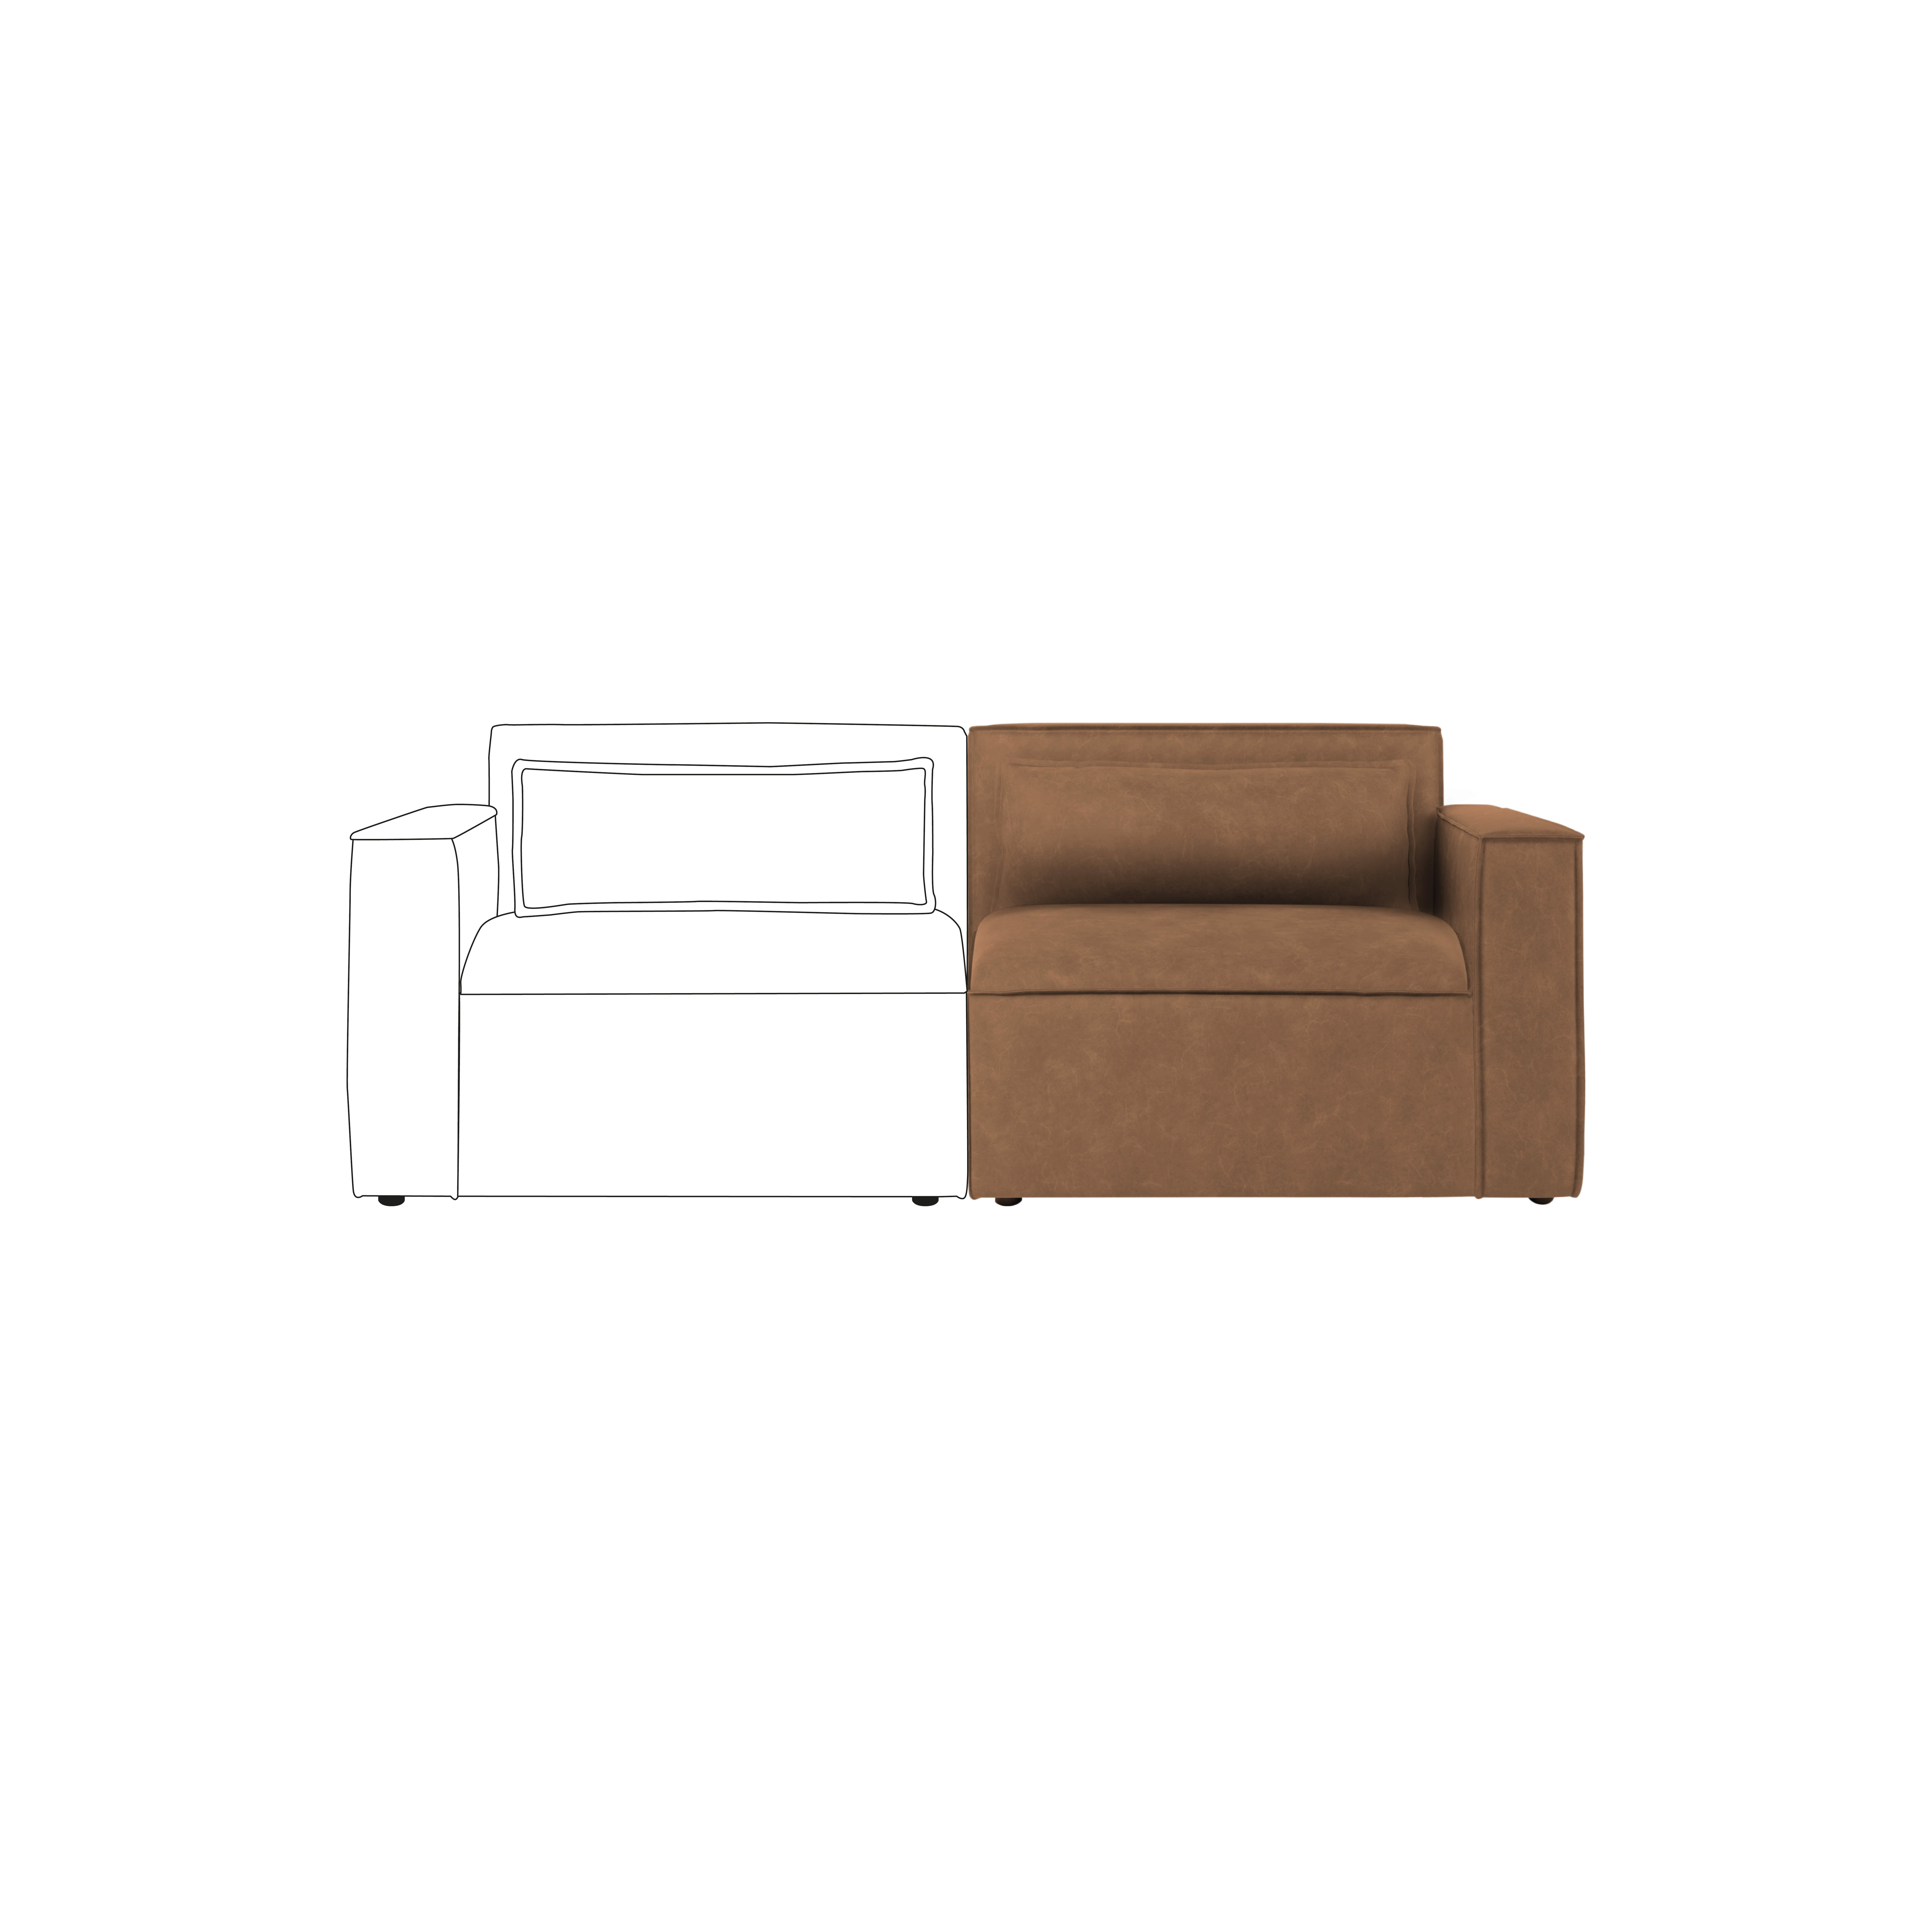 Modular Arne Faux Leather Right Hand Seat